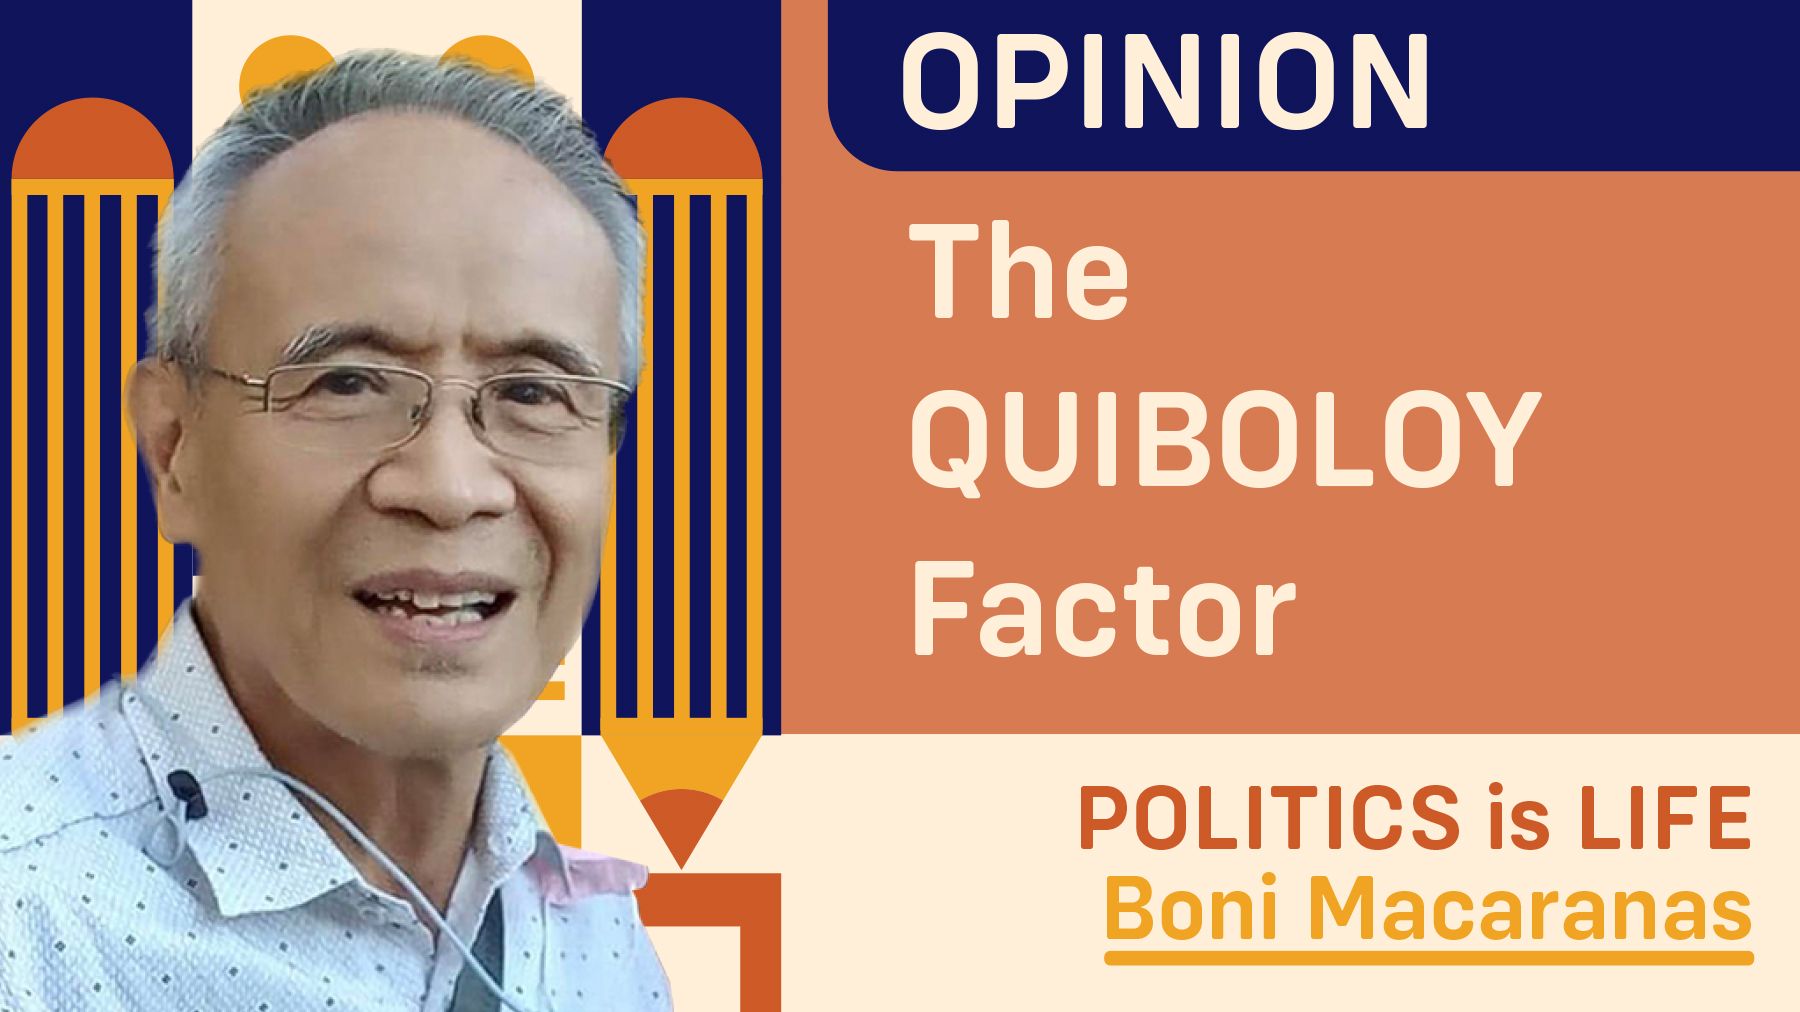 POLITICS is LIFE: The QUIBOLOY Factor